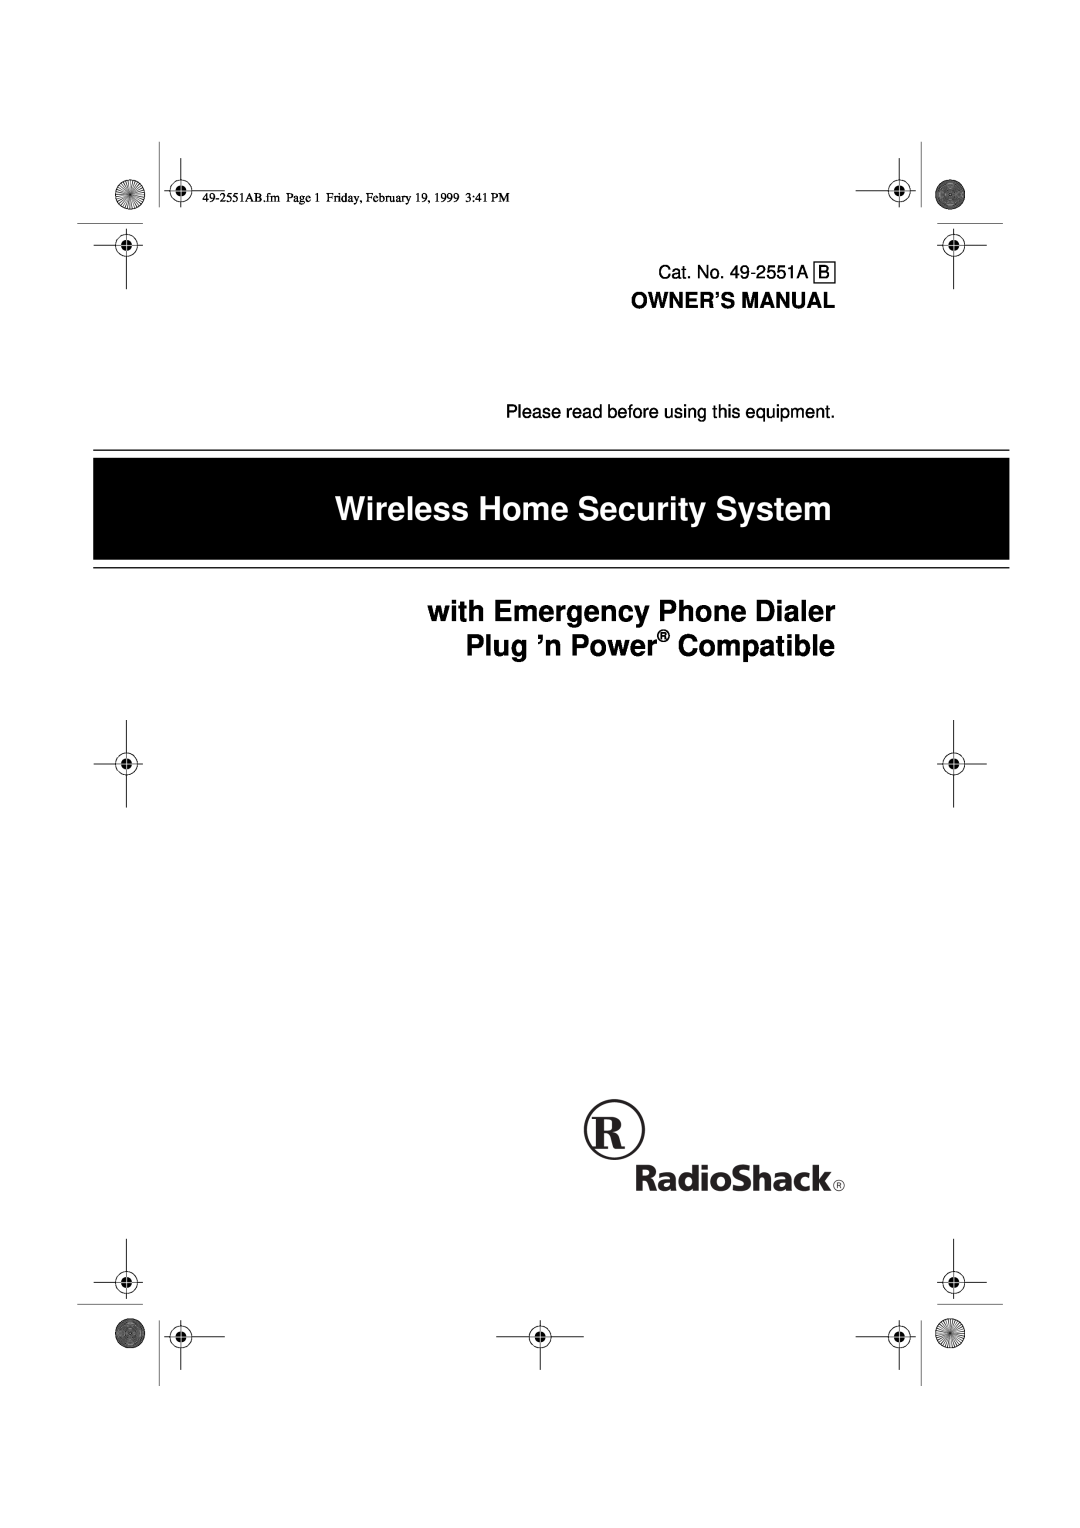 Radio Shack 49-2551A owner manual Wireless Home Security System 